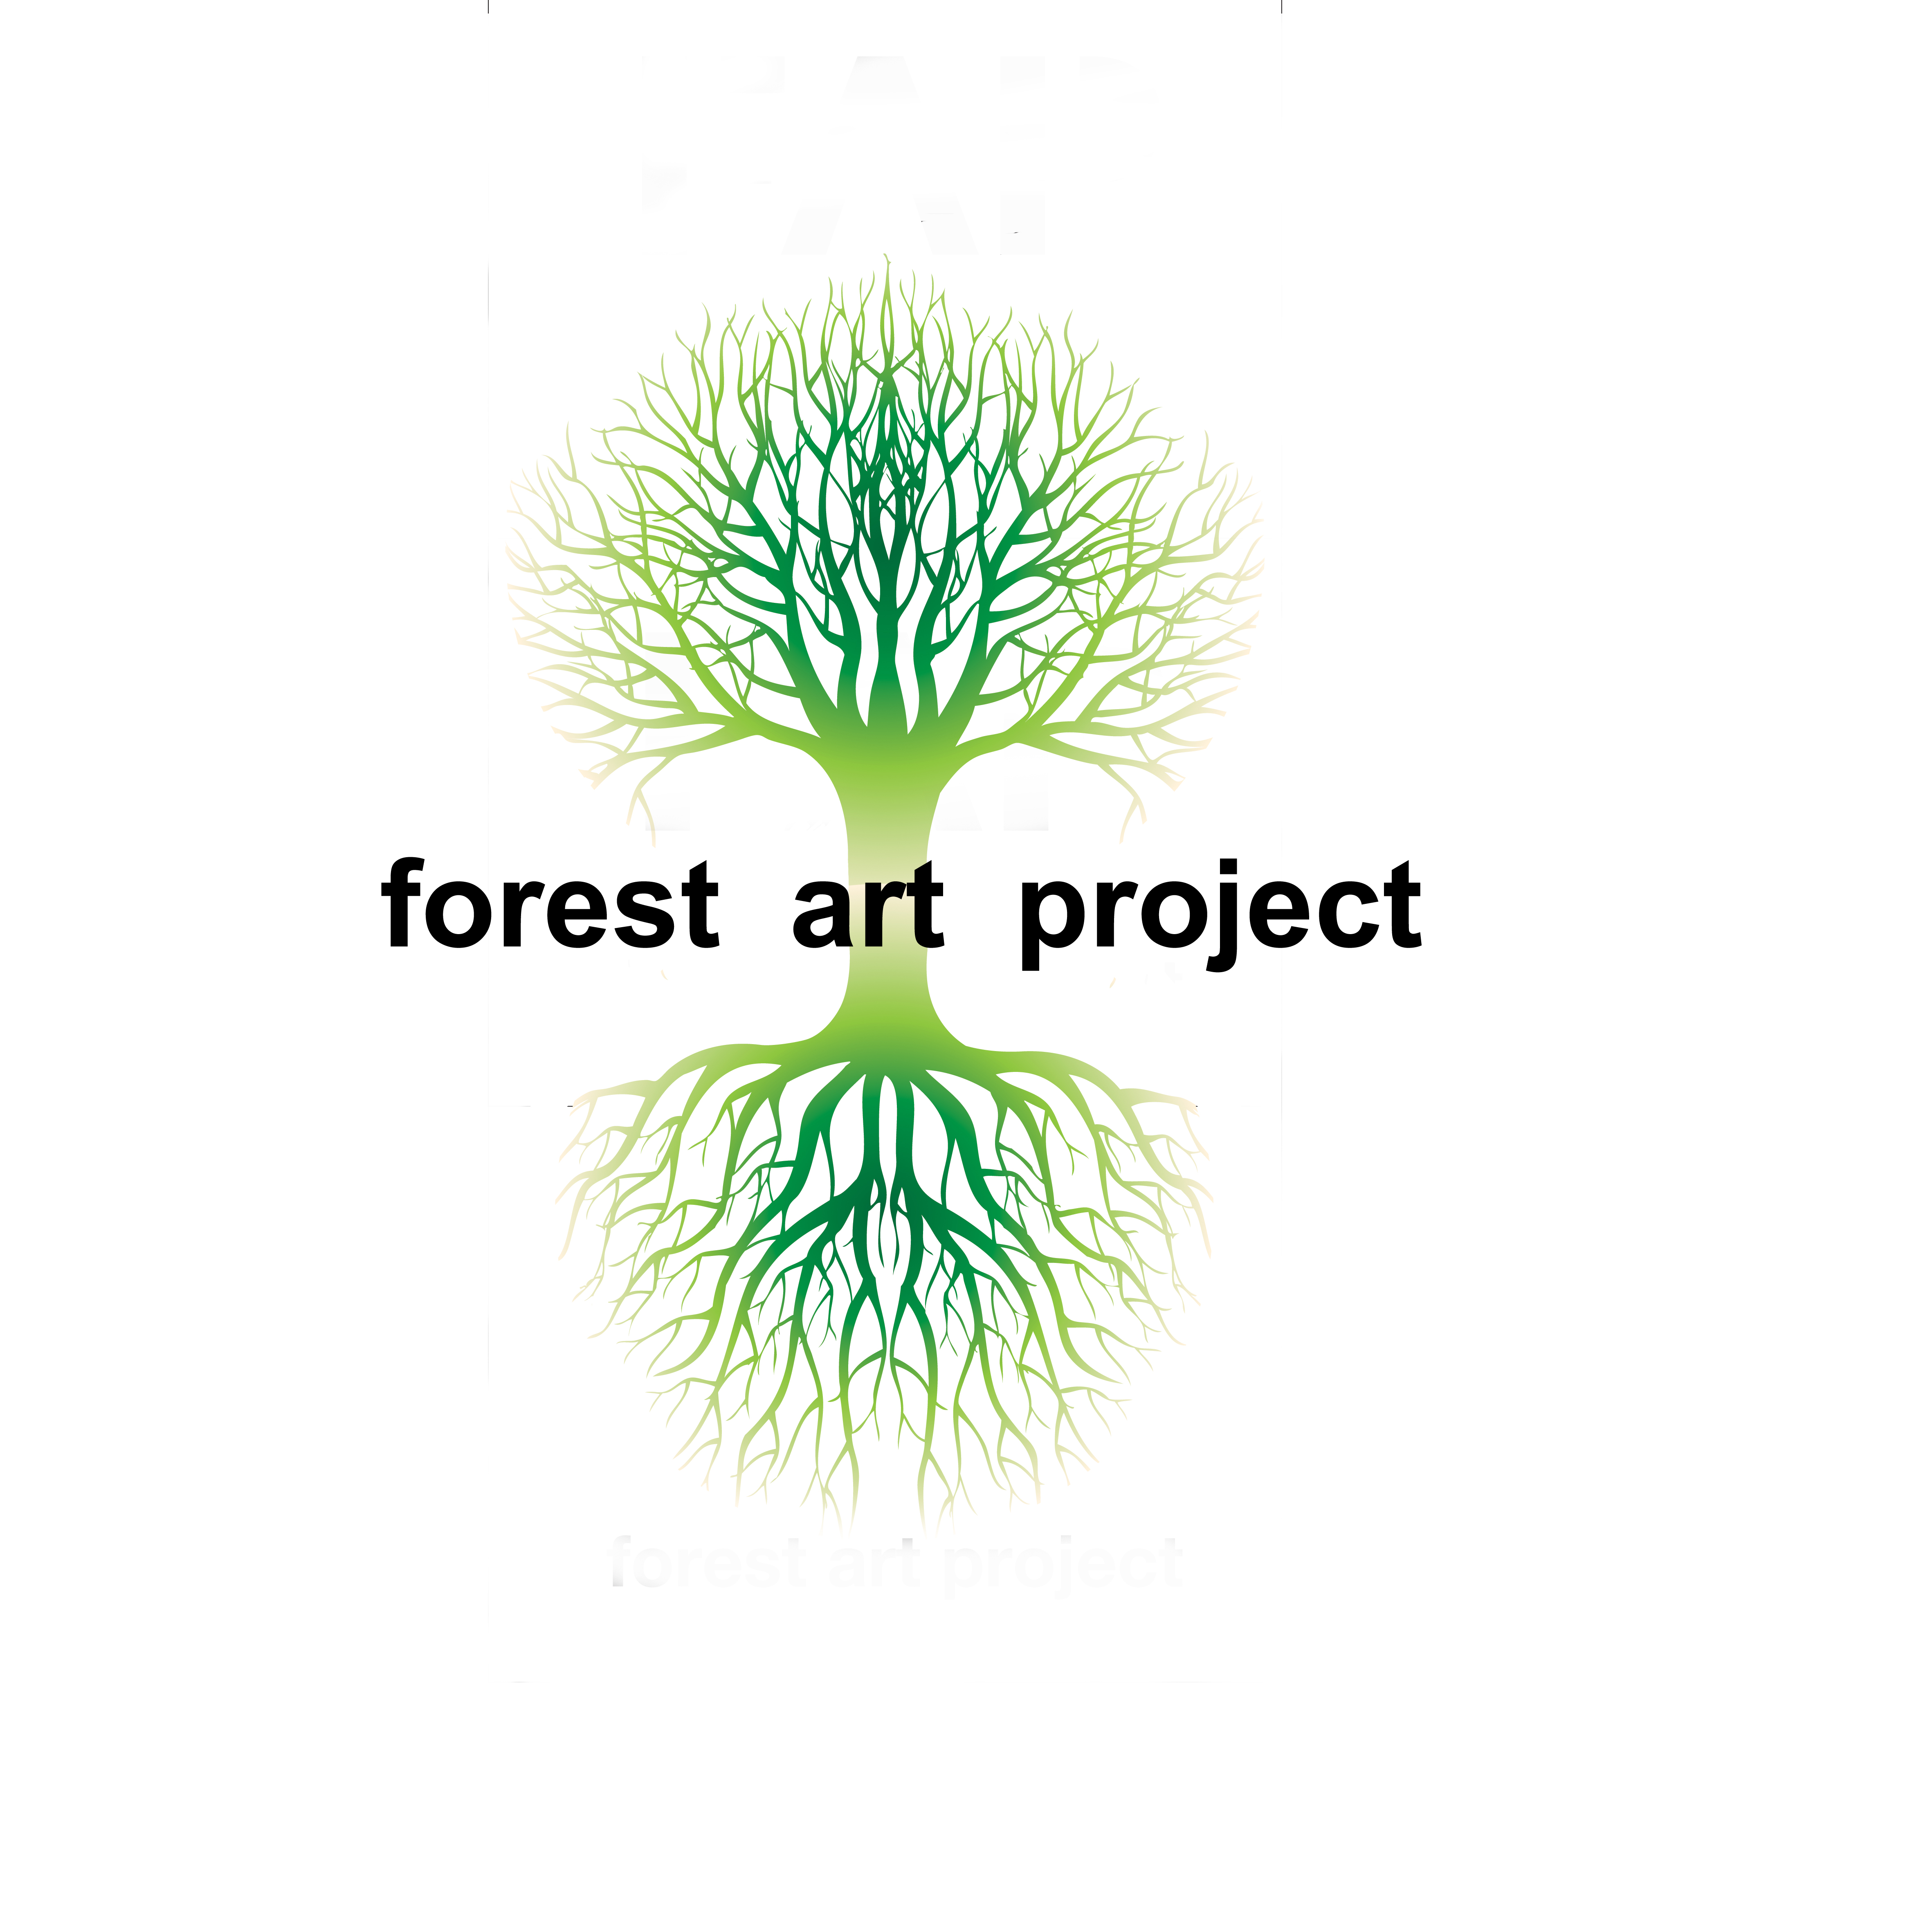 LOGO forest art project